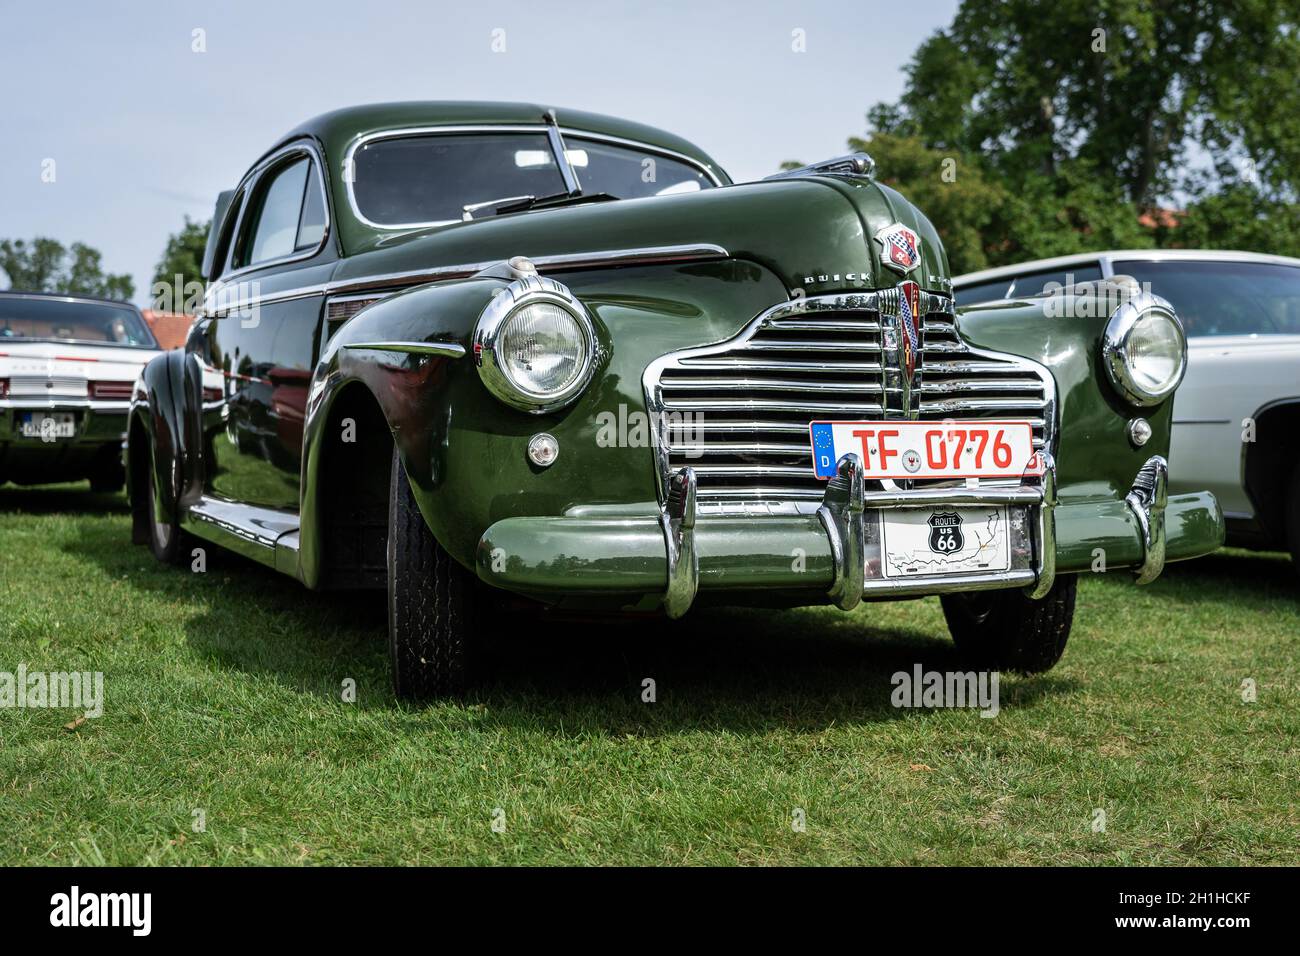 DIEDERSDORF, GERMANY - AUGUST 30, 2020: The full-size car Buick Super coupe, 1940. The exhibition of 'US Car Classics'. Stock Photo